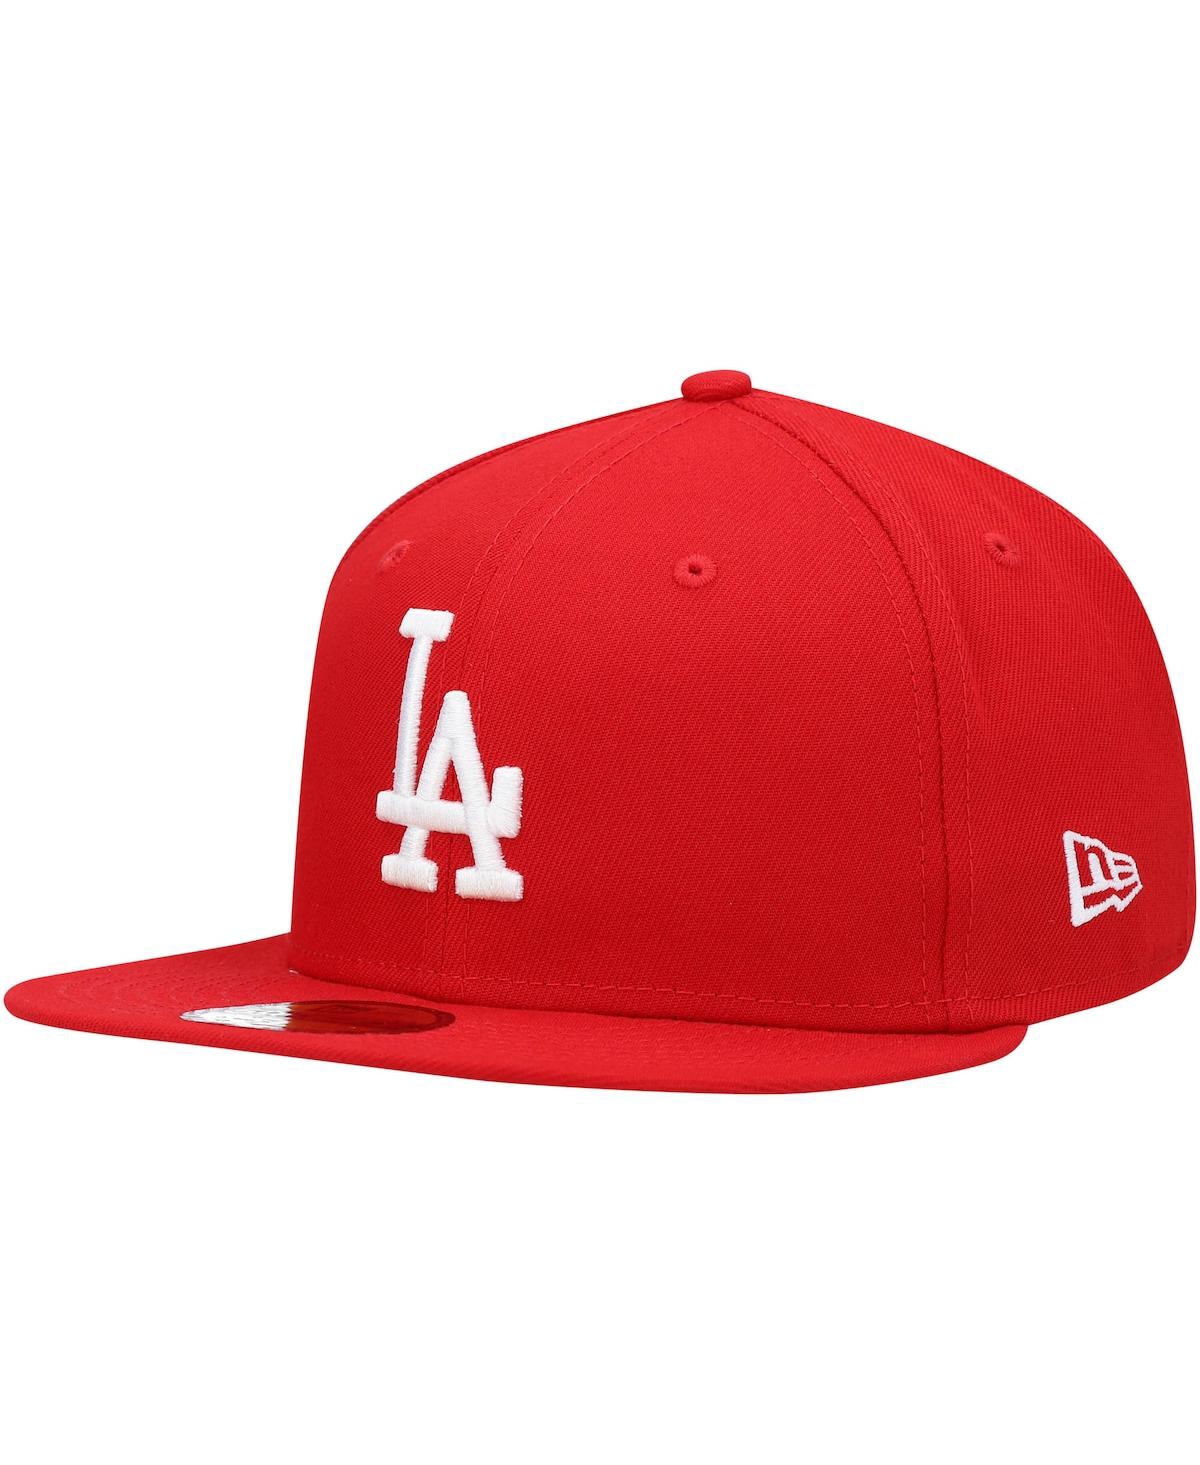 NEW ERA MEN'S NEW ERA RED LOS ANGELES DODGERS LOGO WHITE 59FIFTY FITTED HAT